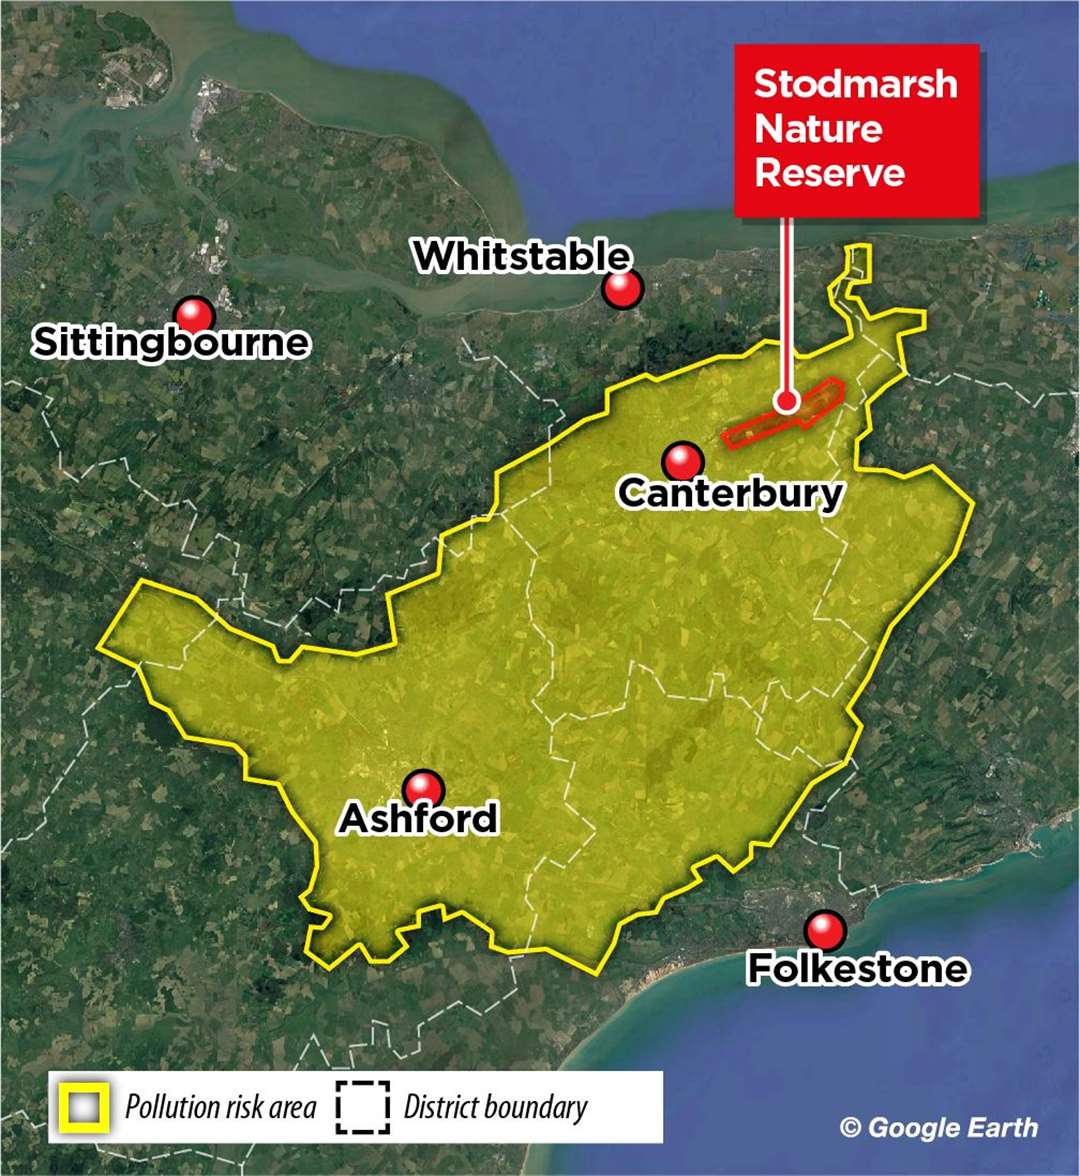 The wide-reaching 'catchment area' which is impacted by the water quality issues